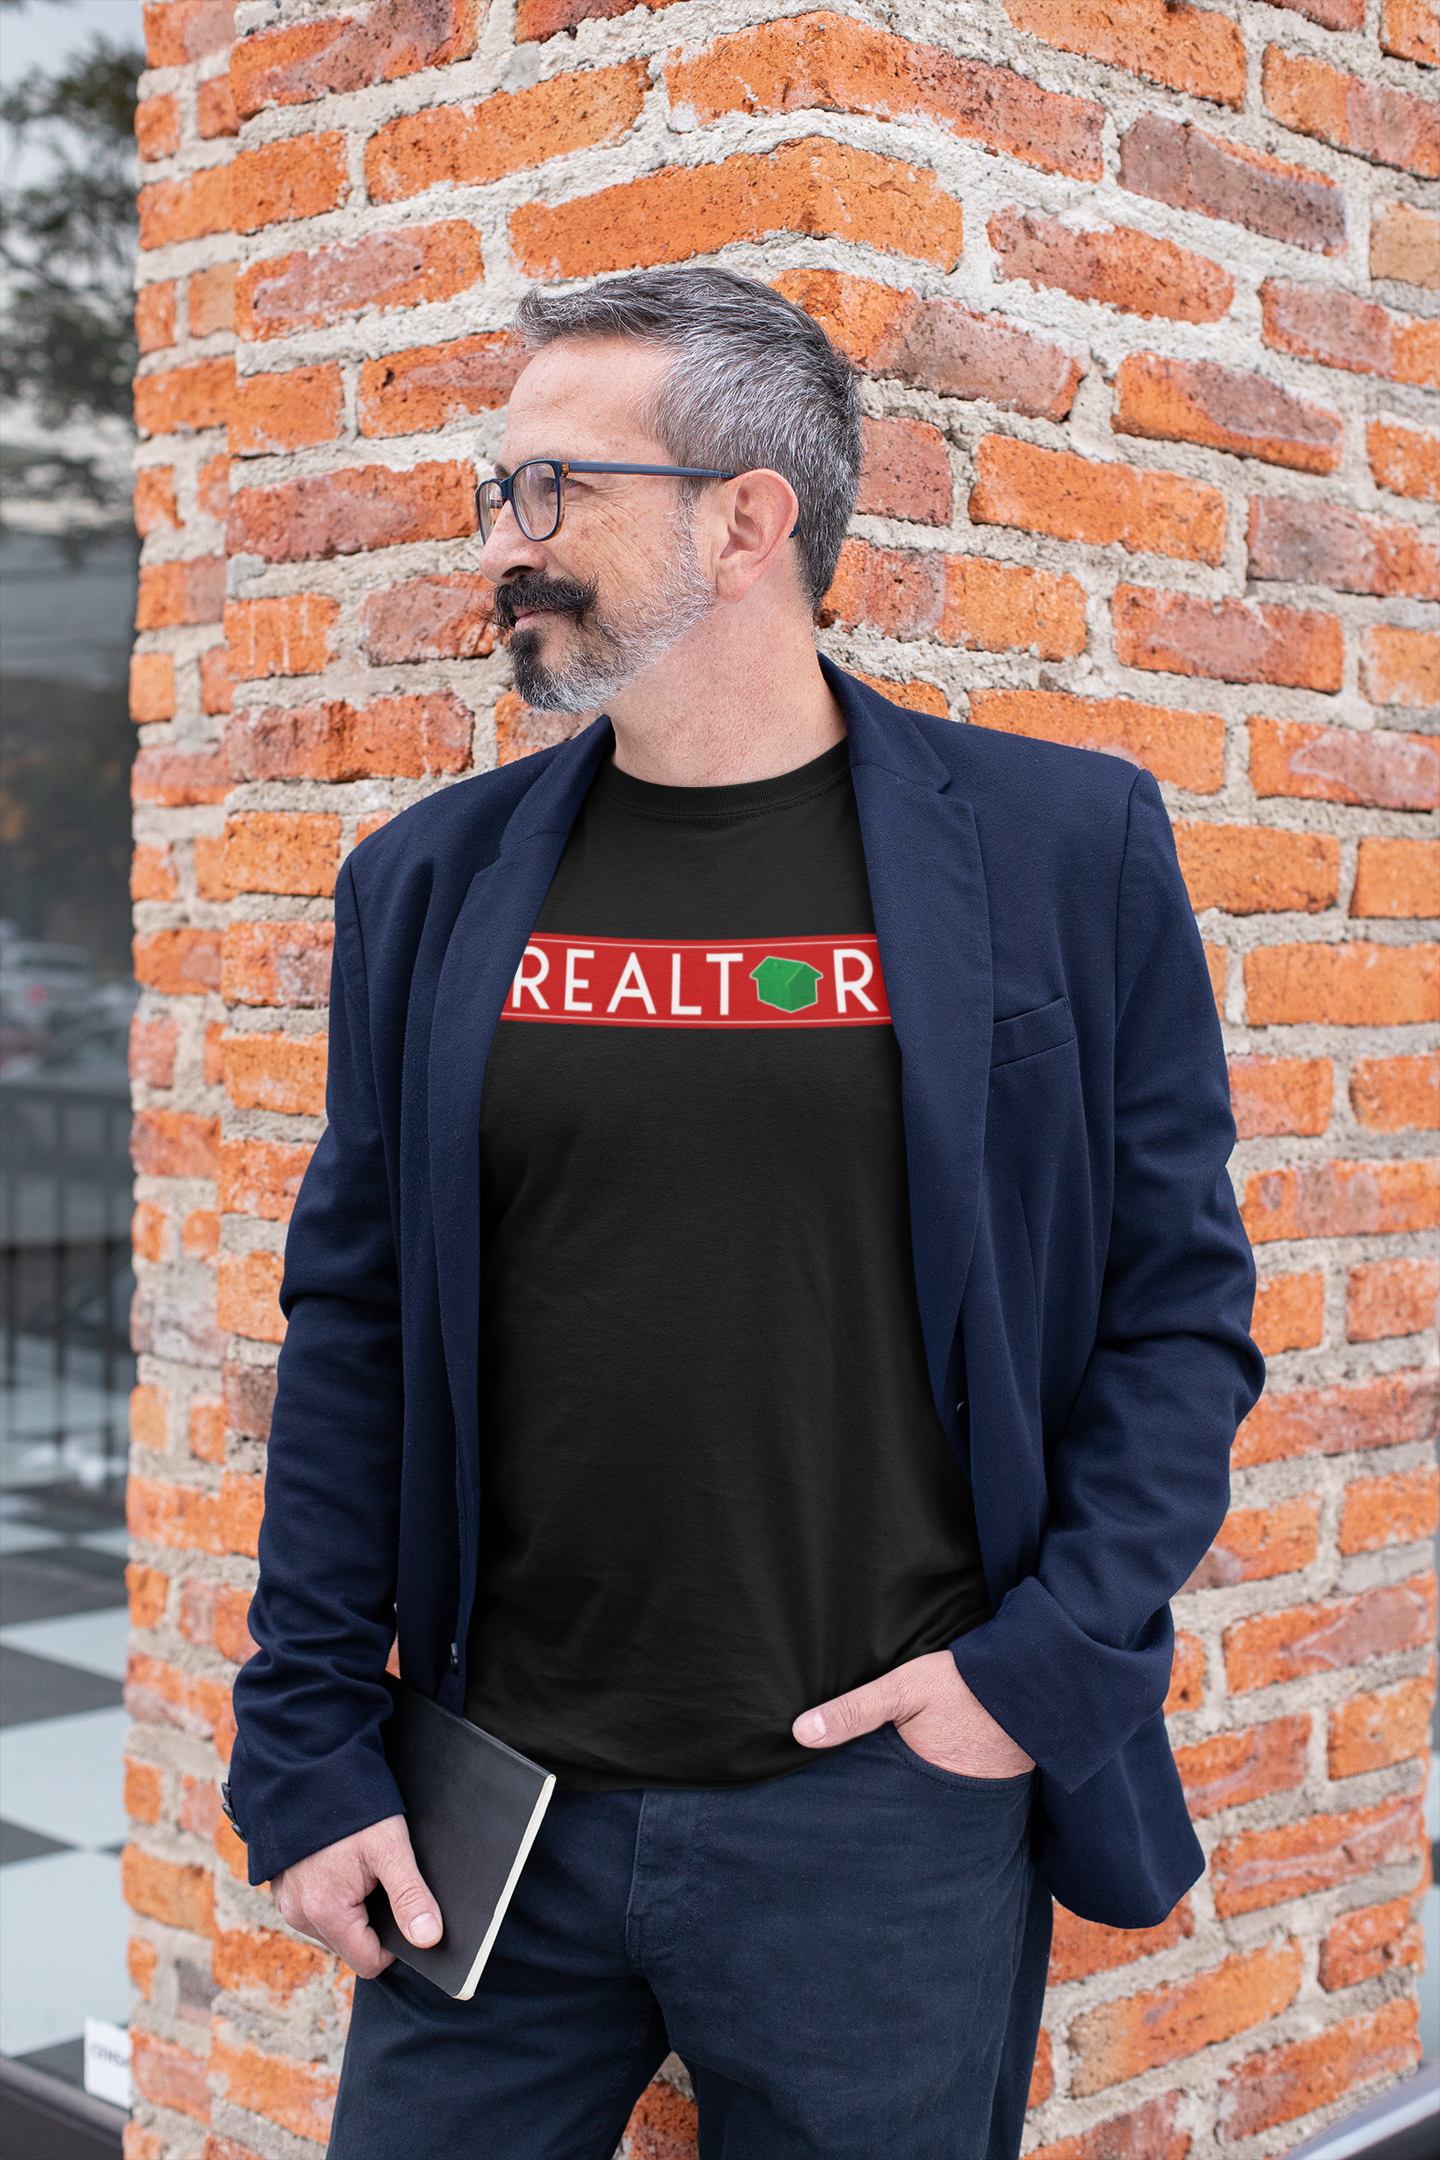 Real Estate Agent T-Shirt